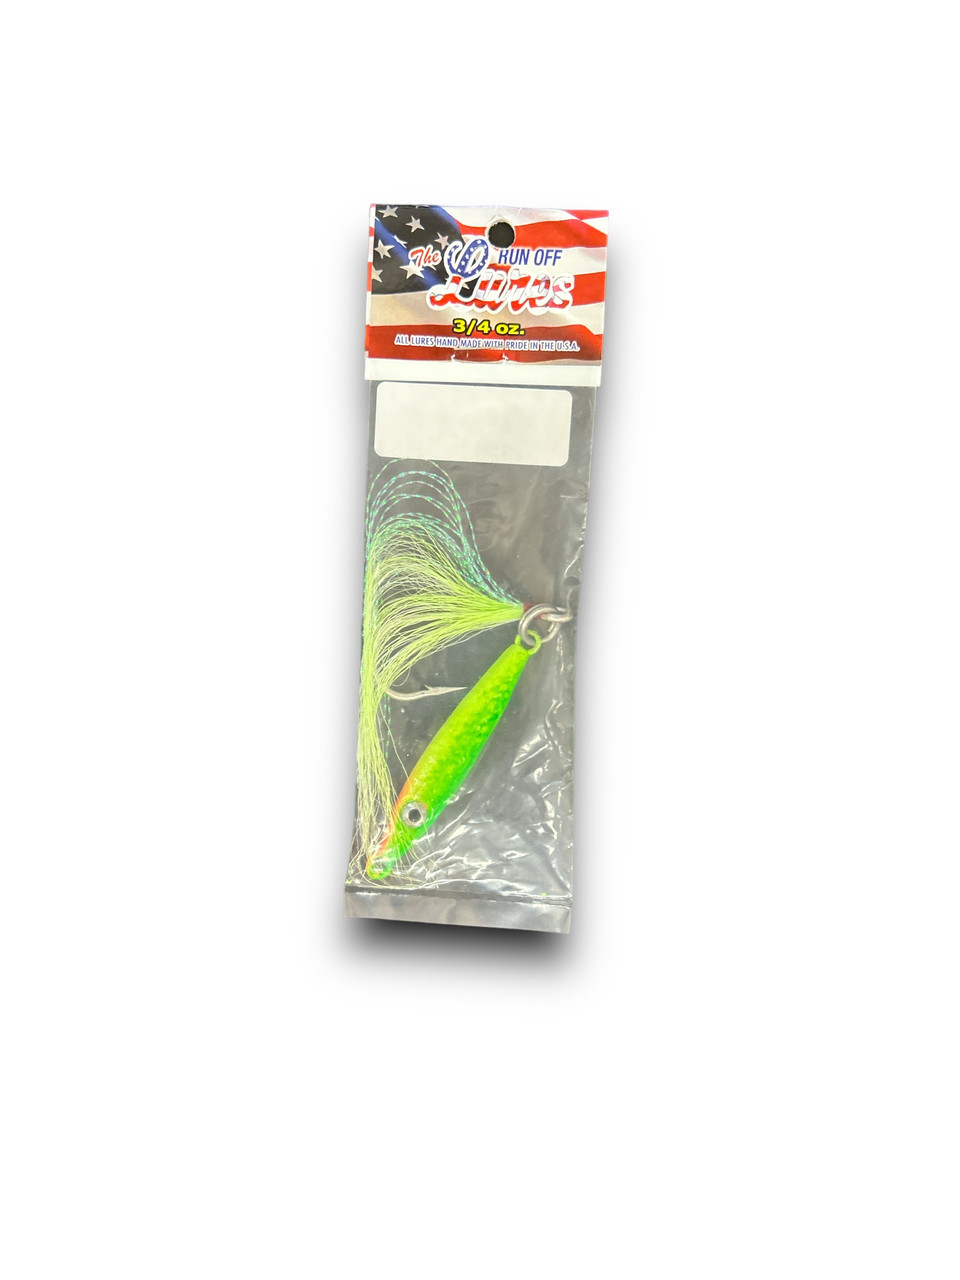 Run Off Lure Spearing Jig - (3/4oz) Chartreuse